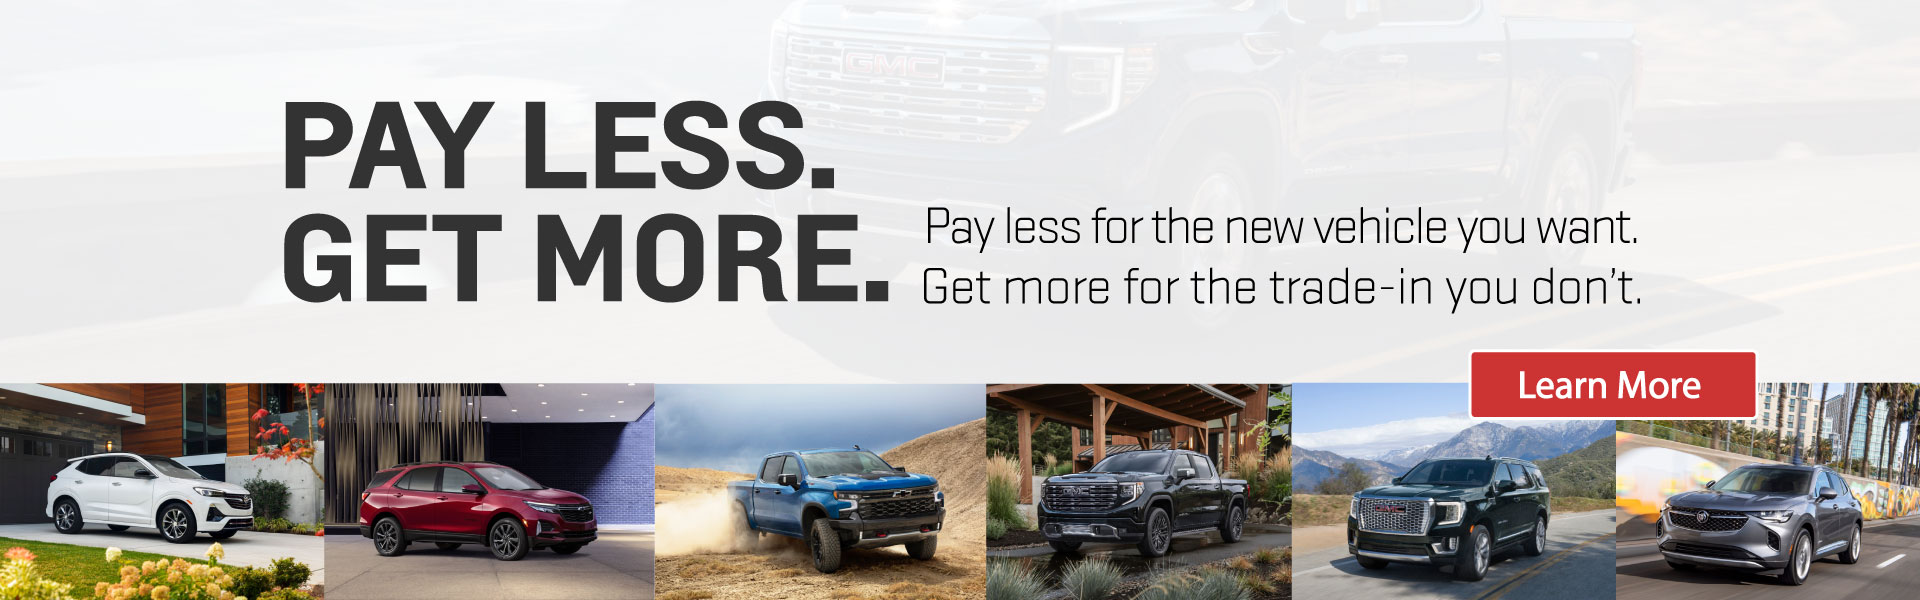 Pay Less. Get More